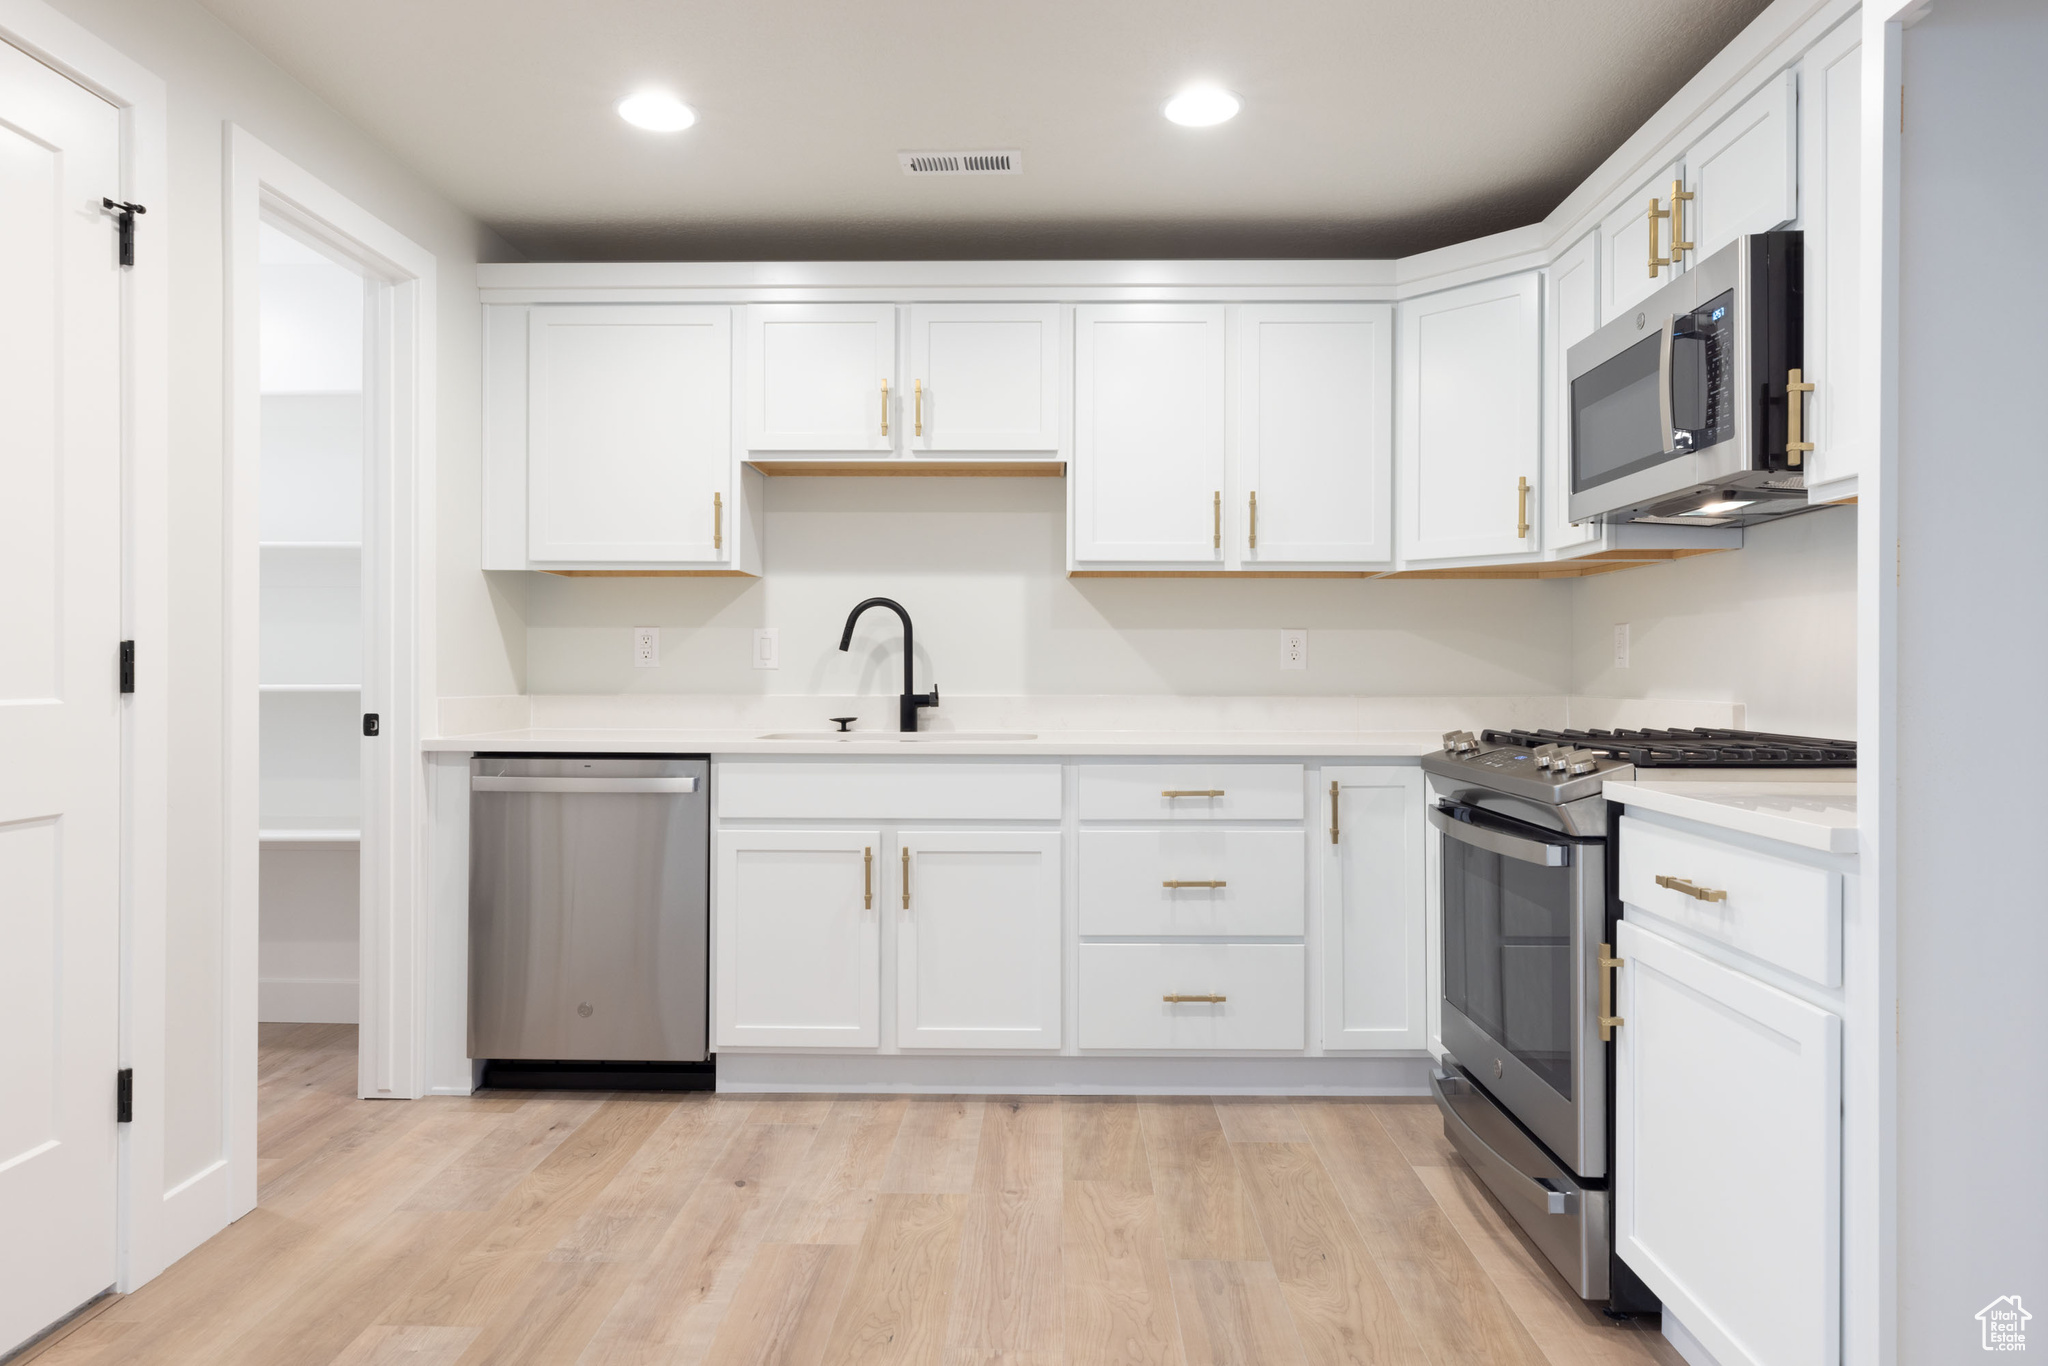 Kitchen featuring light hardwood / wood-style flooring, white cabinets, appliances with stainless steel finishes, and sink